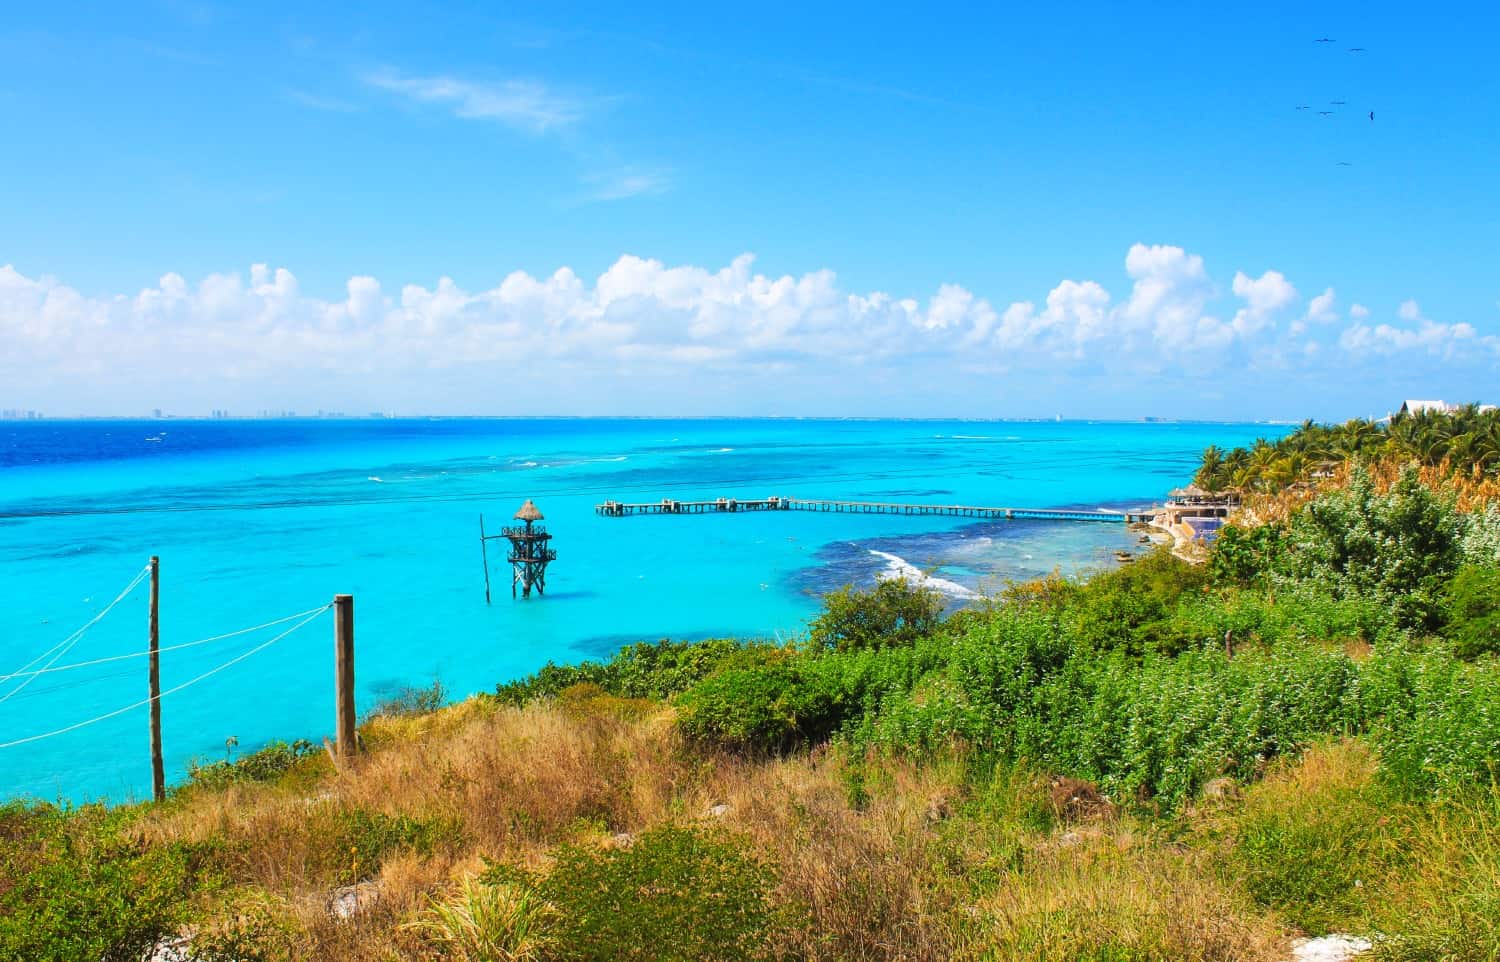 View over the ocean in Isla Mujeres, with a wooden jetty extending out from the land and grass and trees visible on the shoreline.